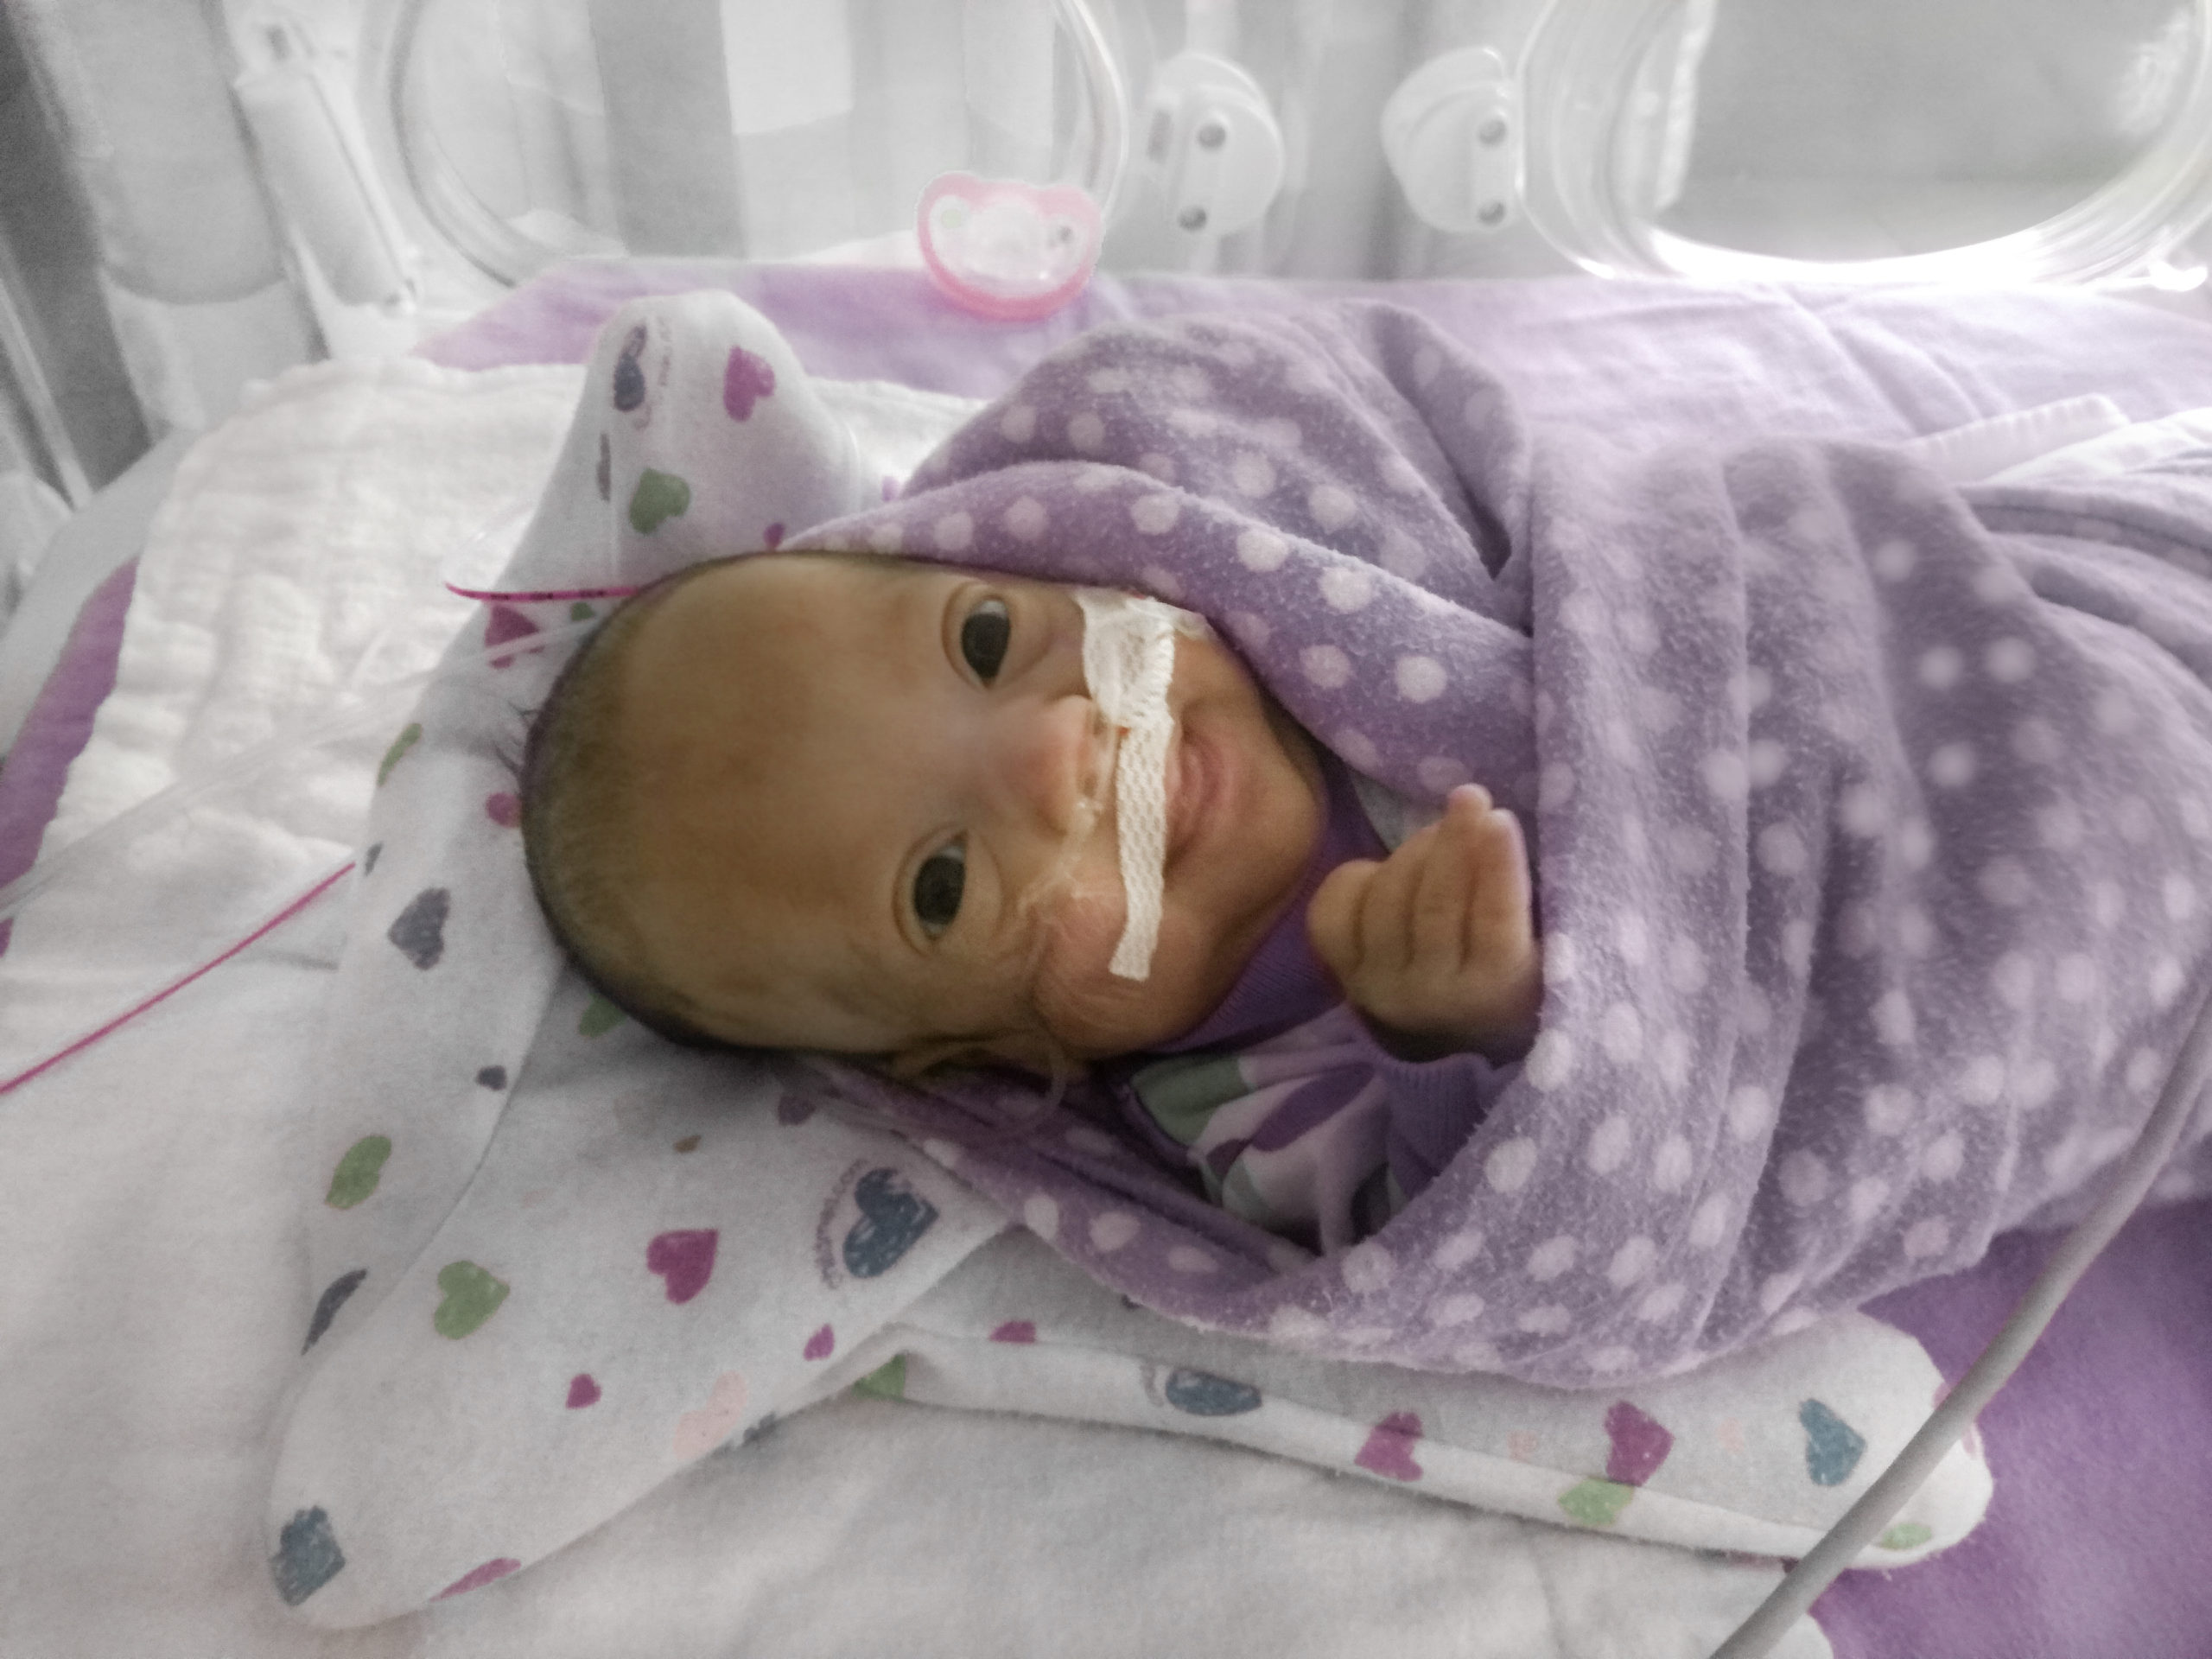 Baby Jenna wrapped in a blanket in the NICU